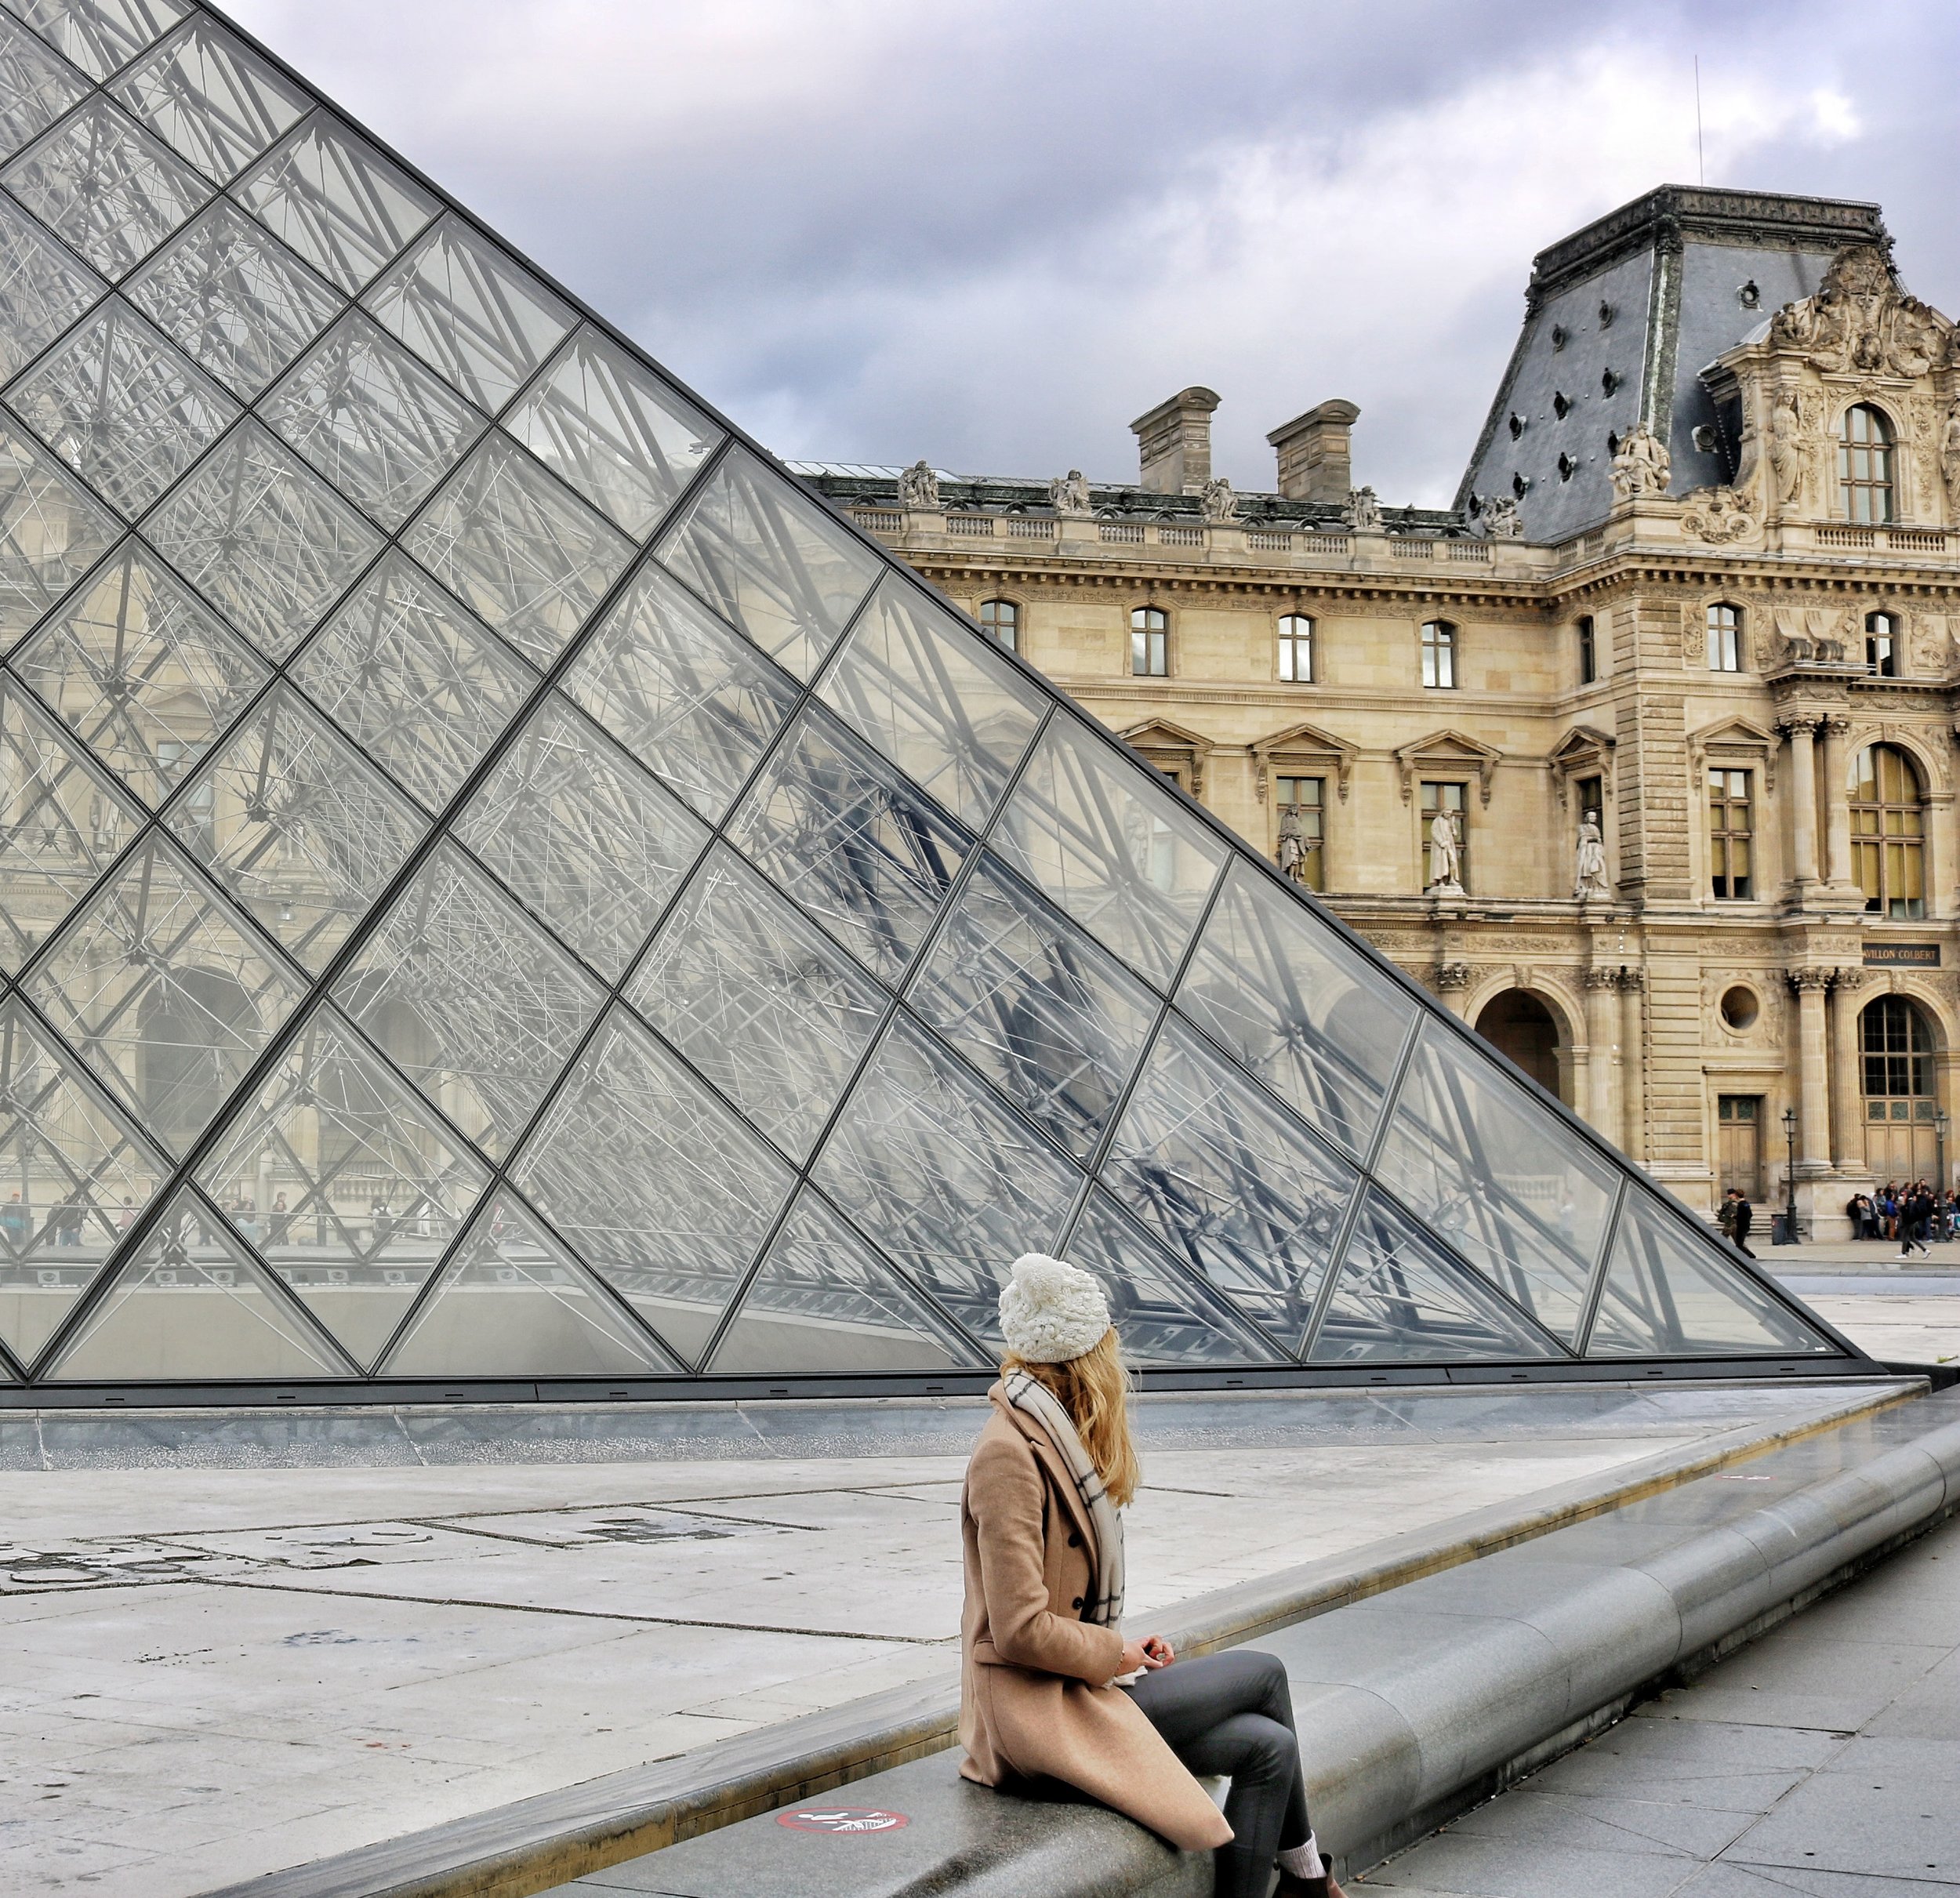 The Louvre - Paris weekend guide (on a budget) - Helena Bradbury Travel Blogger | how to see Paris on a budget | where to stay on a budget in Paris | paris for two days | 48 hours in paris | what to do with one night in Paris | paris budget guide | …